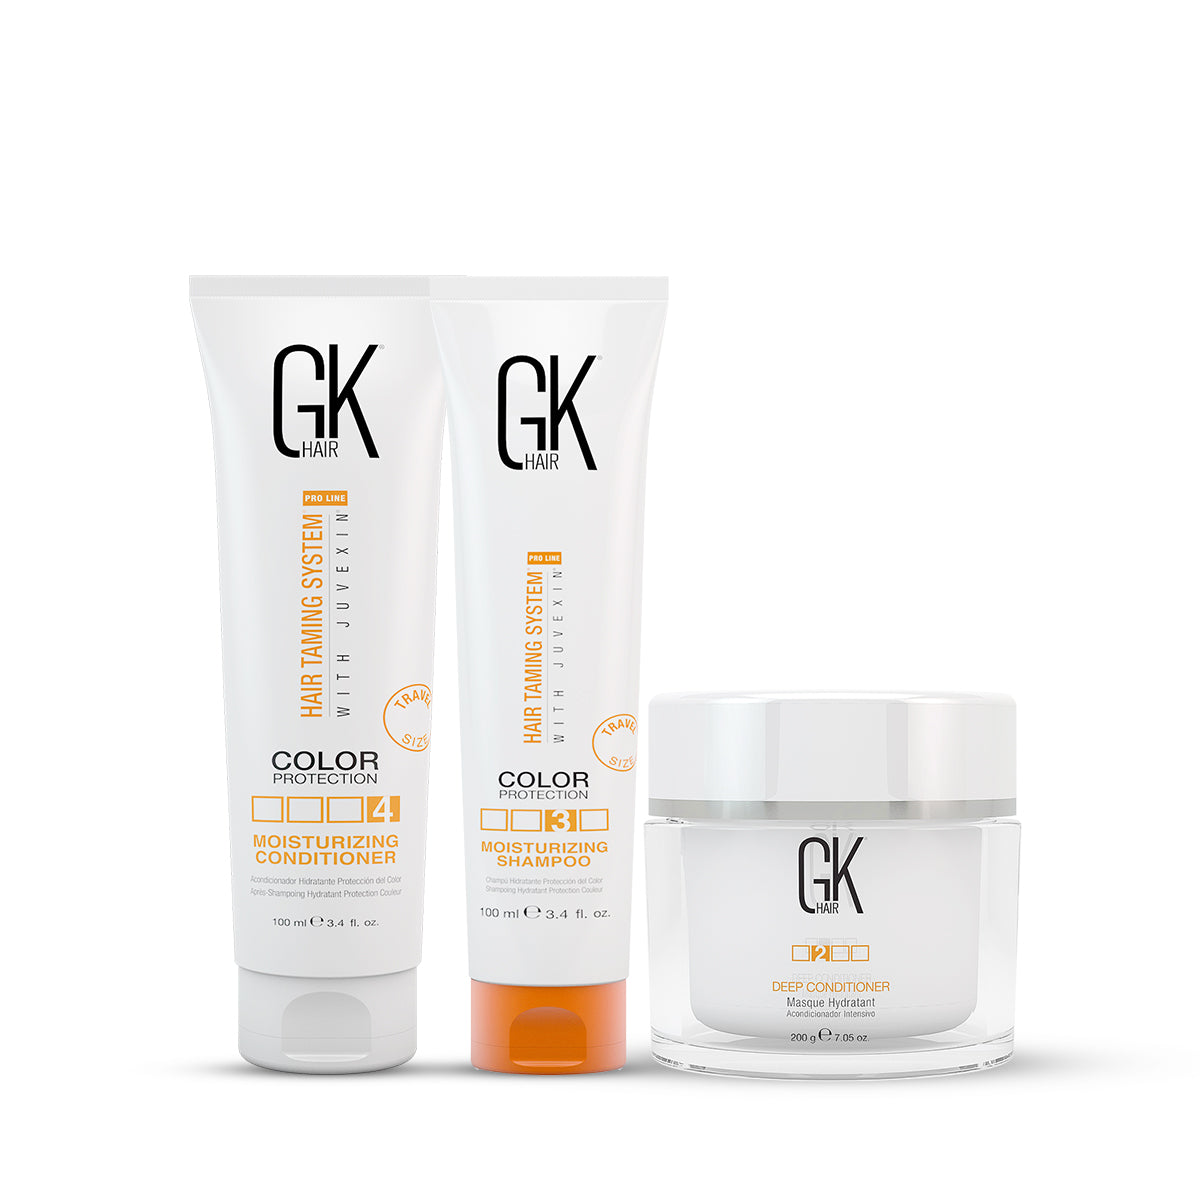 GK Hair Moisturizing Shampoo and Conditioner 100 Ml with Deep Conditioner Masque 200 Ml